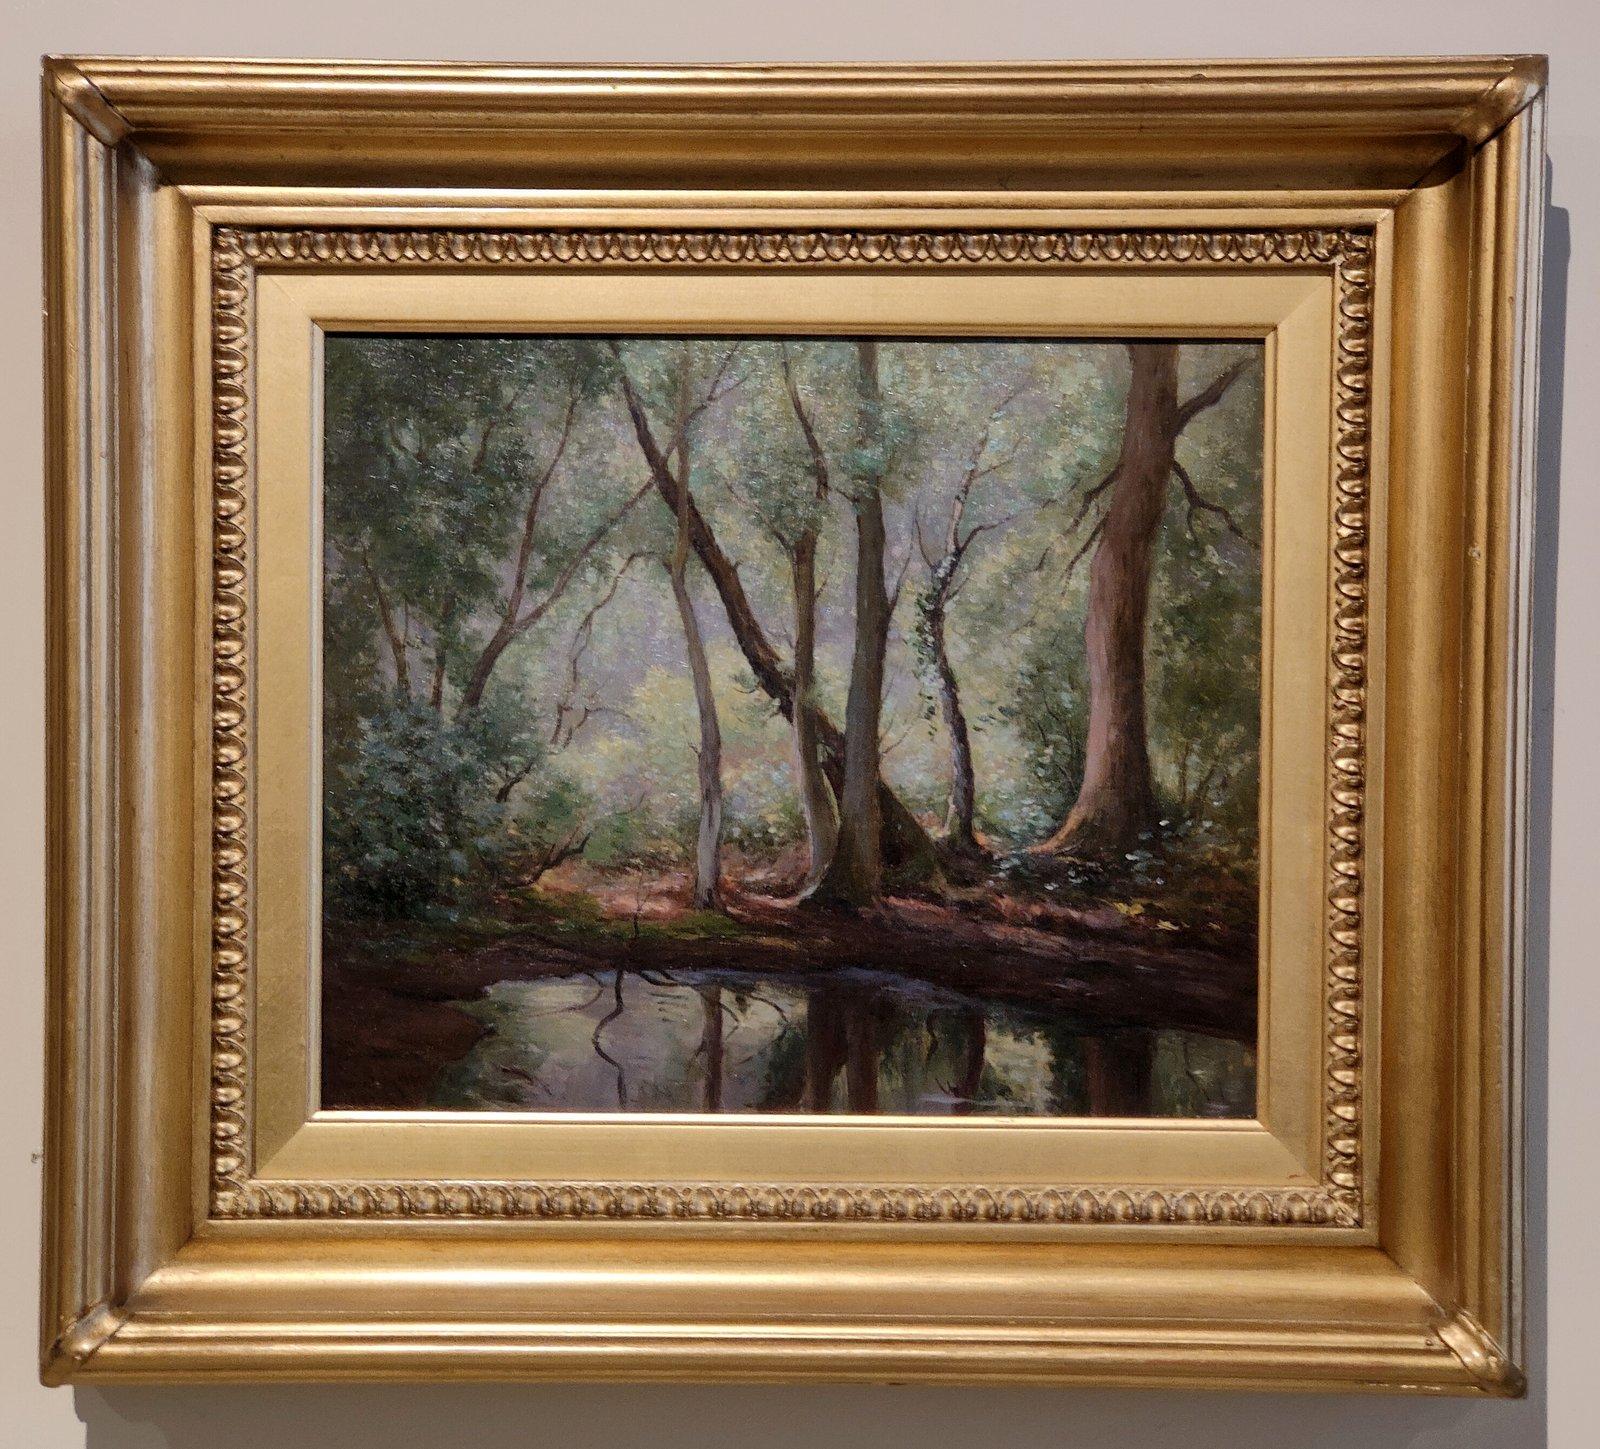 Oil Painting by William B Rowe "The Woodland Pool" 1854 -1933 Provincial painter of a rural English landscapes on a scale. Oil on canvas. Signed and dated 1912. Fine original frame.

Dimensions unframed:
height 10" x width 12"
Dimensions framed 16"